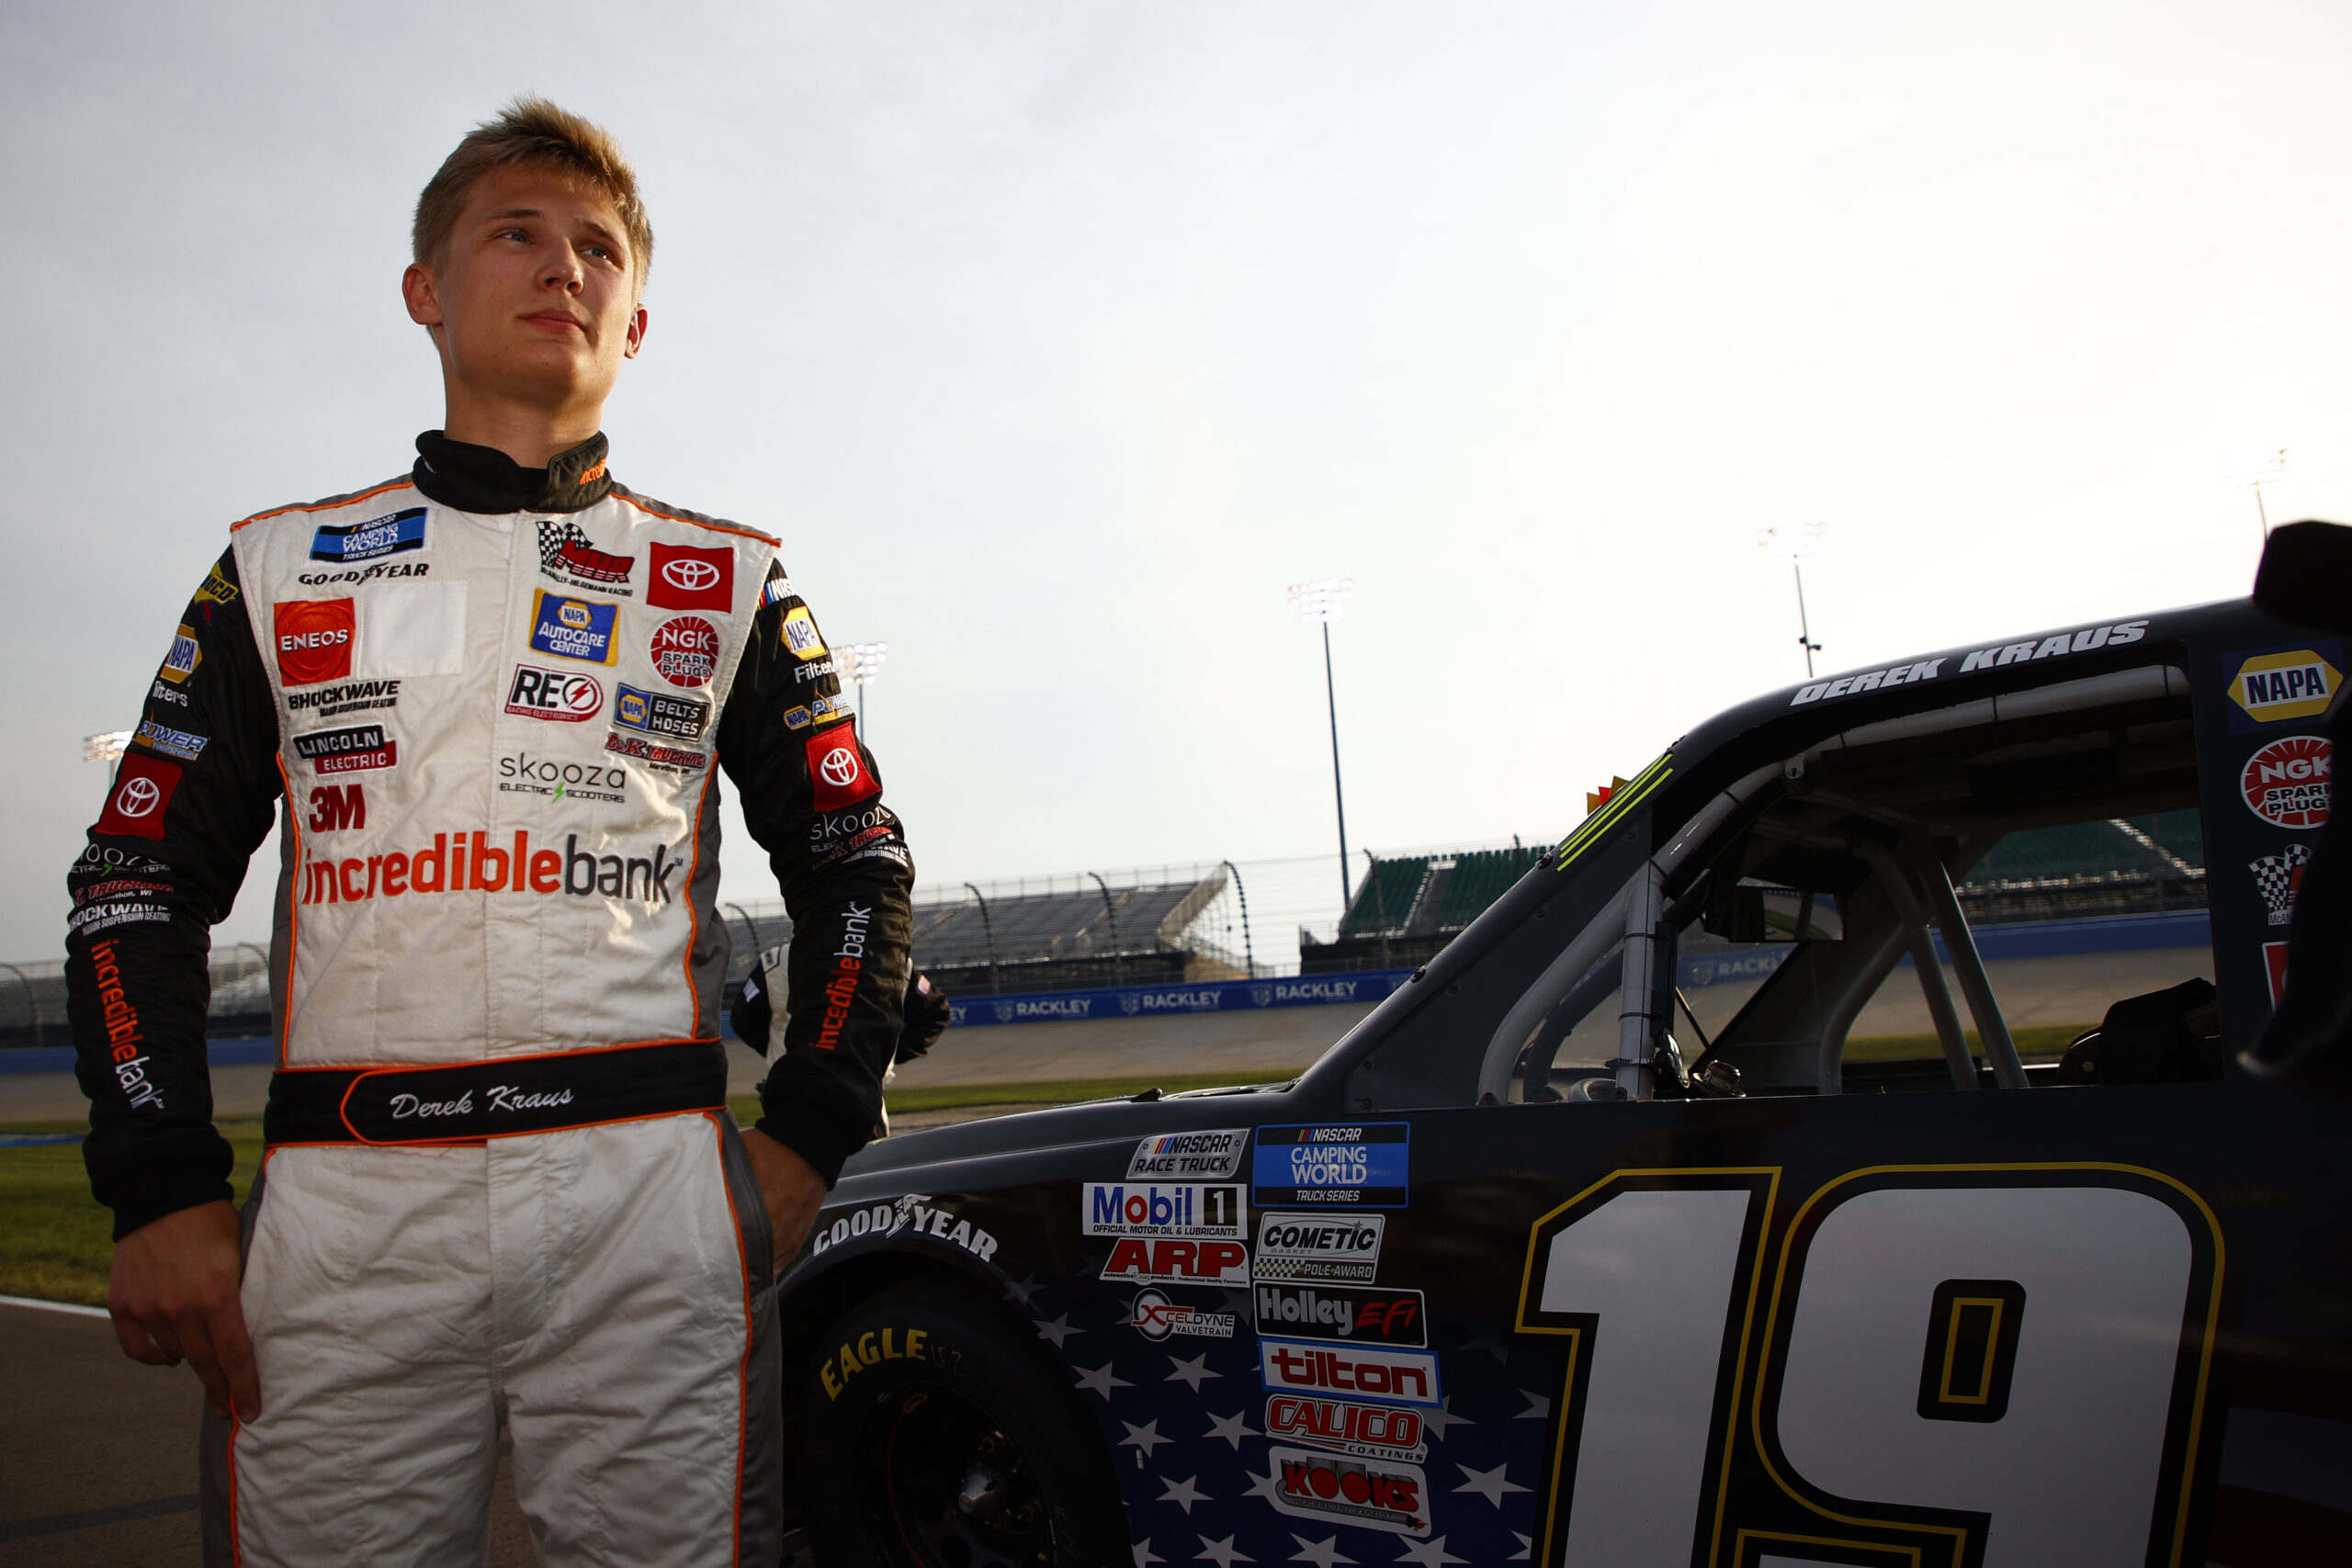 Derek Kraus, driver of the #19 Thorogood Toyota, waits on the grid prior to the NASCAR Camping World Truck Series Rackley Roofing 200 at Nashville Superspeedway on June 18, 2021 in Lebanon, Tennessee. (Photo by Jared C. Tilton/Getty Images)